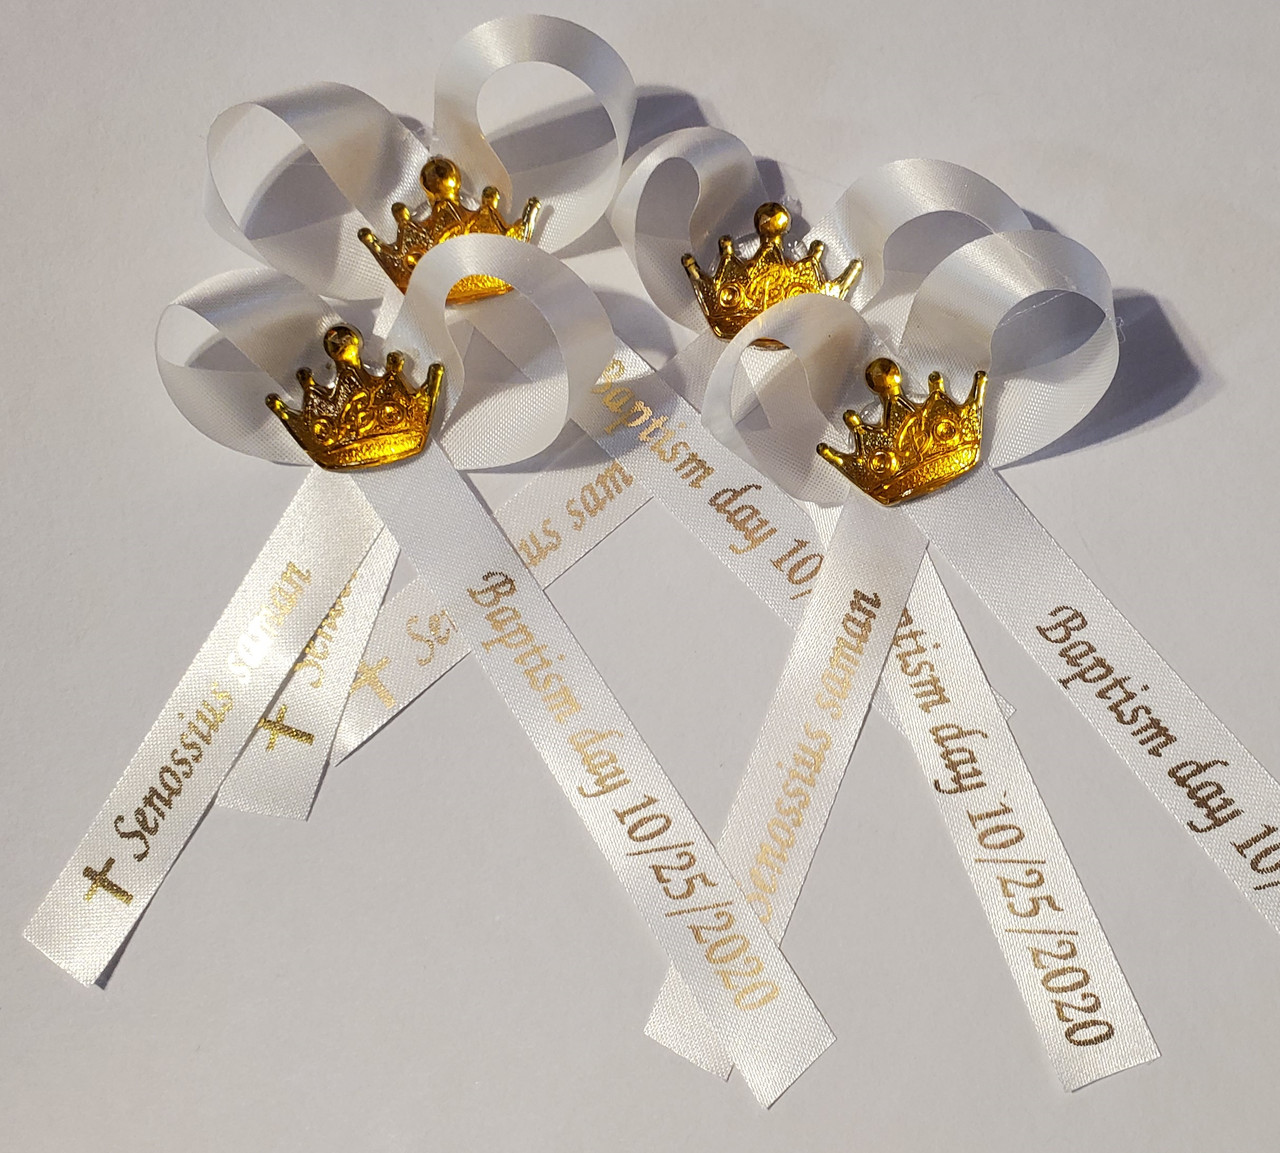 Personalized Ribbon Bows for Wedding, Bridal or Baby Shower - Pack of 25